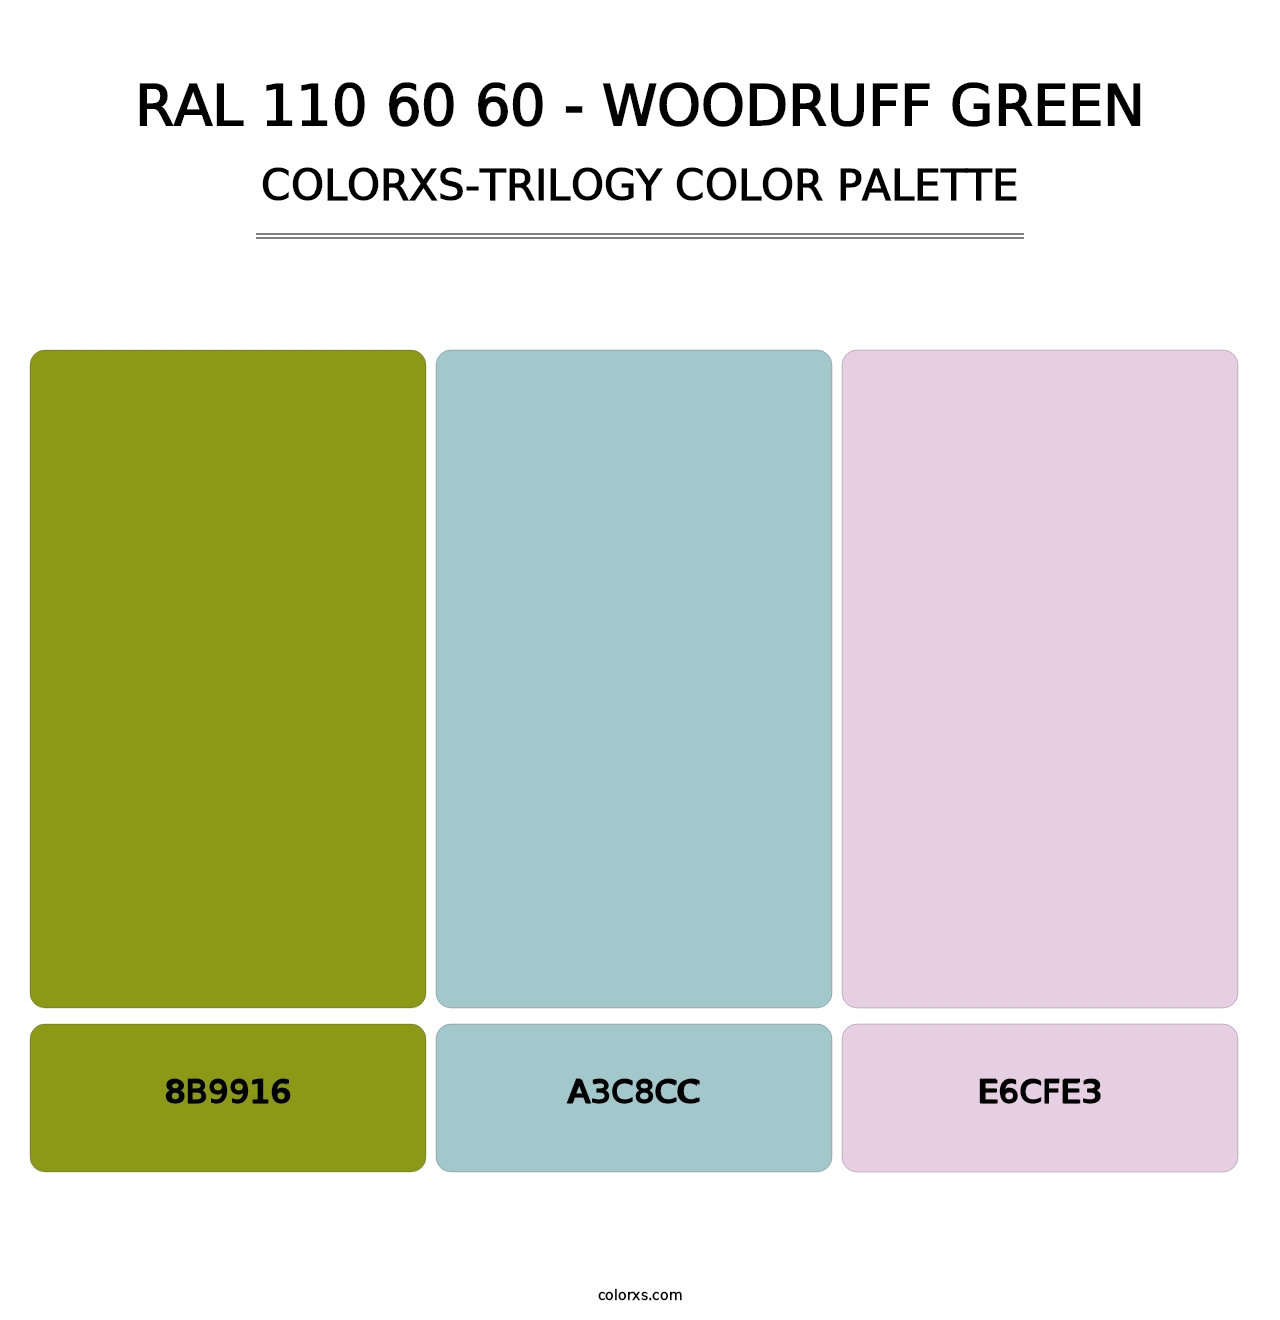 RAL 110 60 60 - Woodruff Green - Colorxs Trilogy Palette